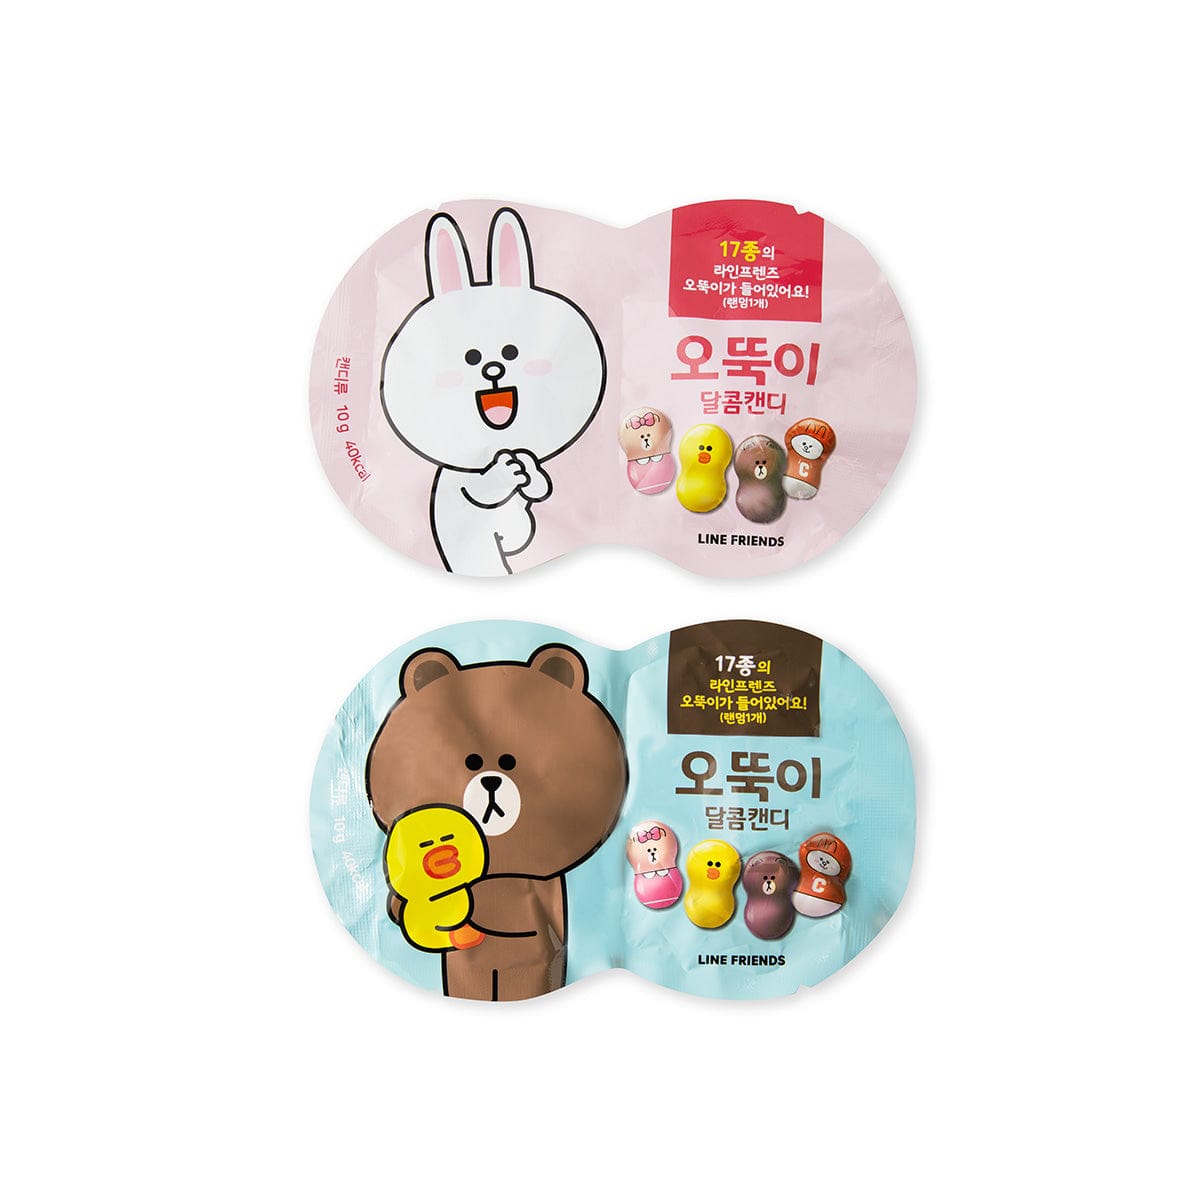 LINE FRIENDS FIGURINE ROLY-POLY 라인프렌즈 오뚝이 달콤캔디